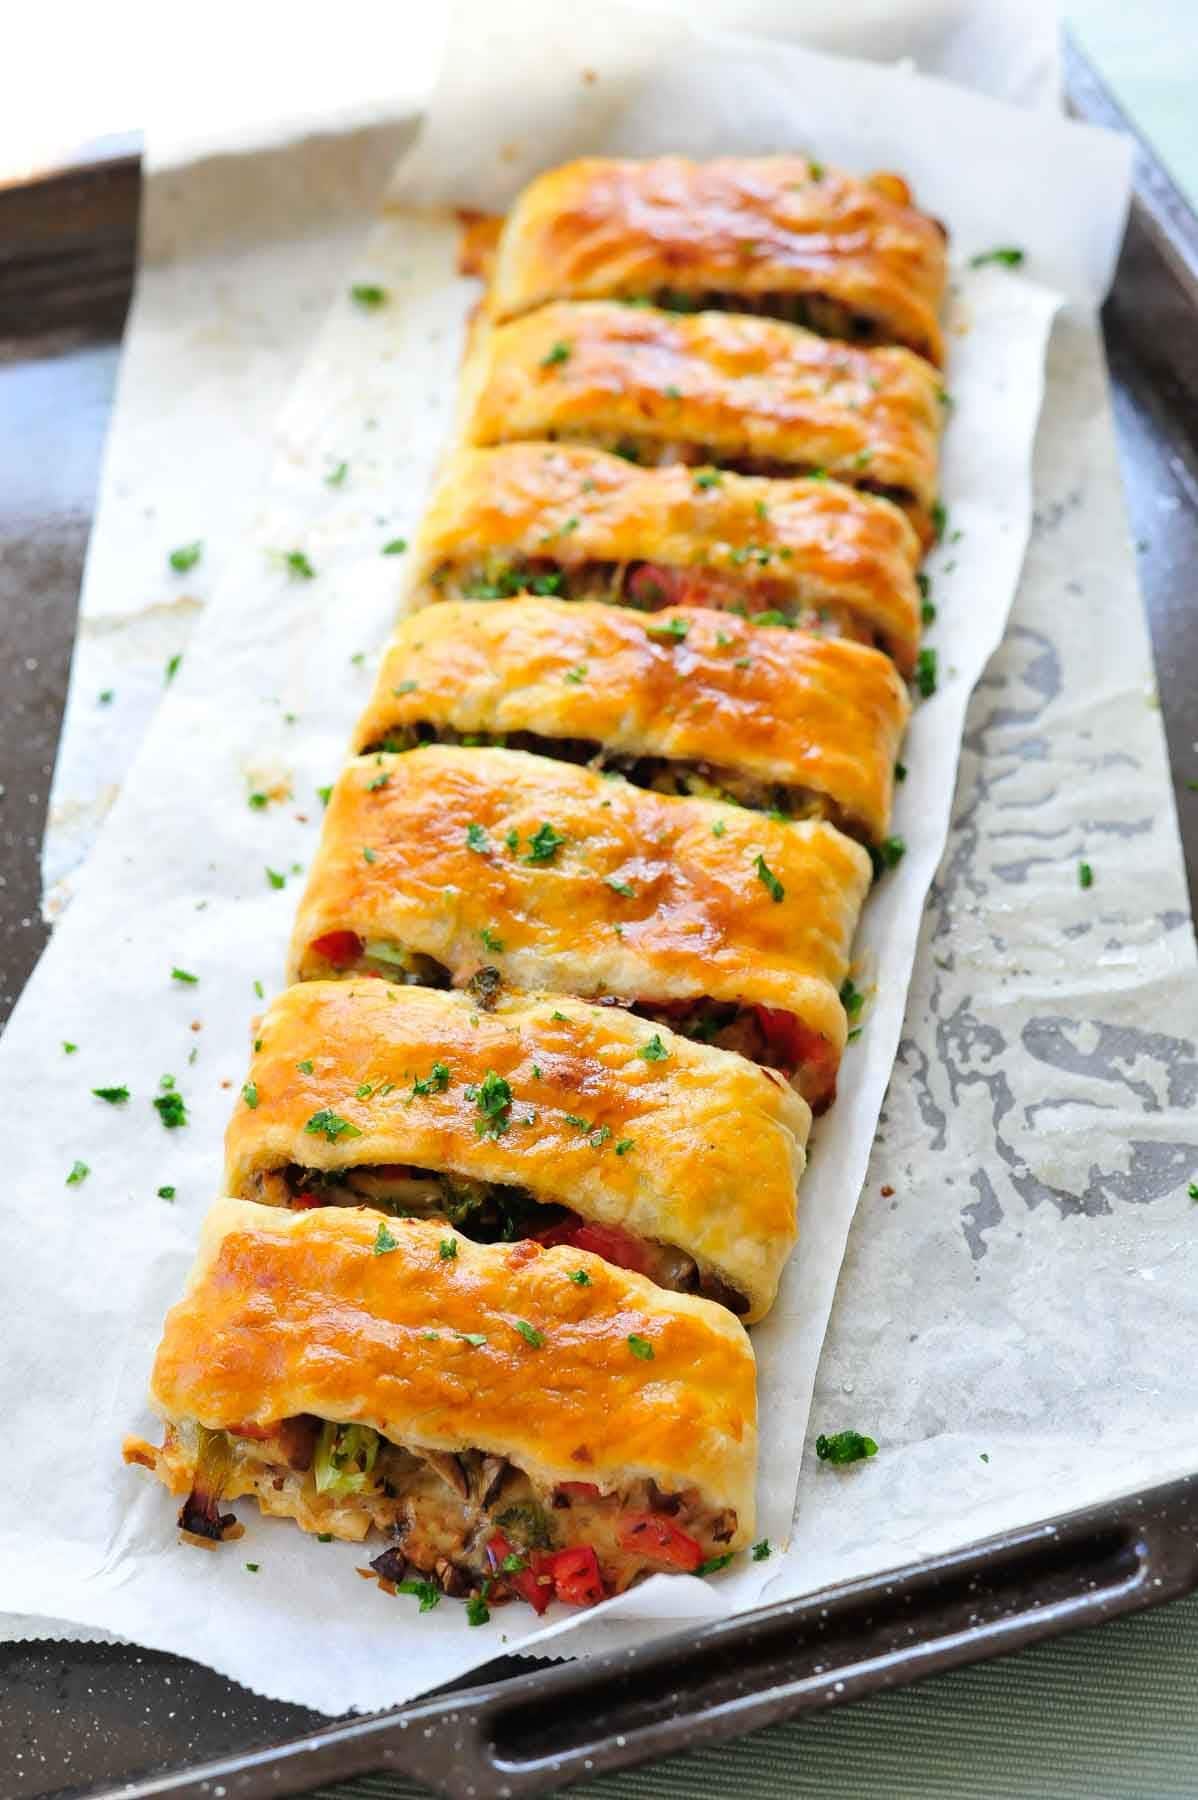 Puff pastry strudel with vegetables and cheese - Everyday Delicious